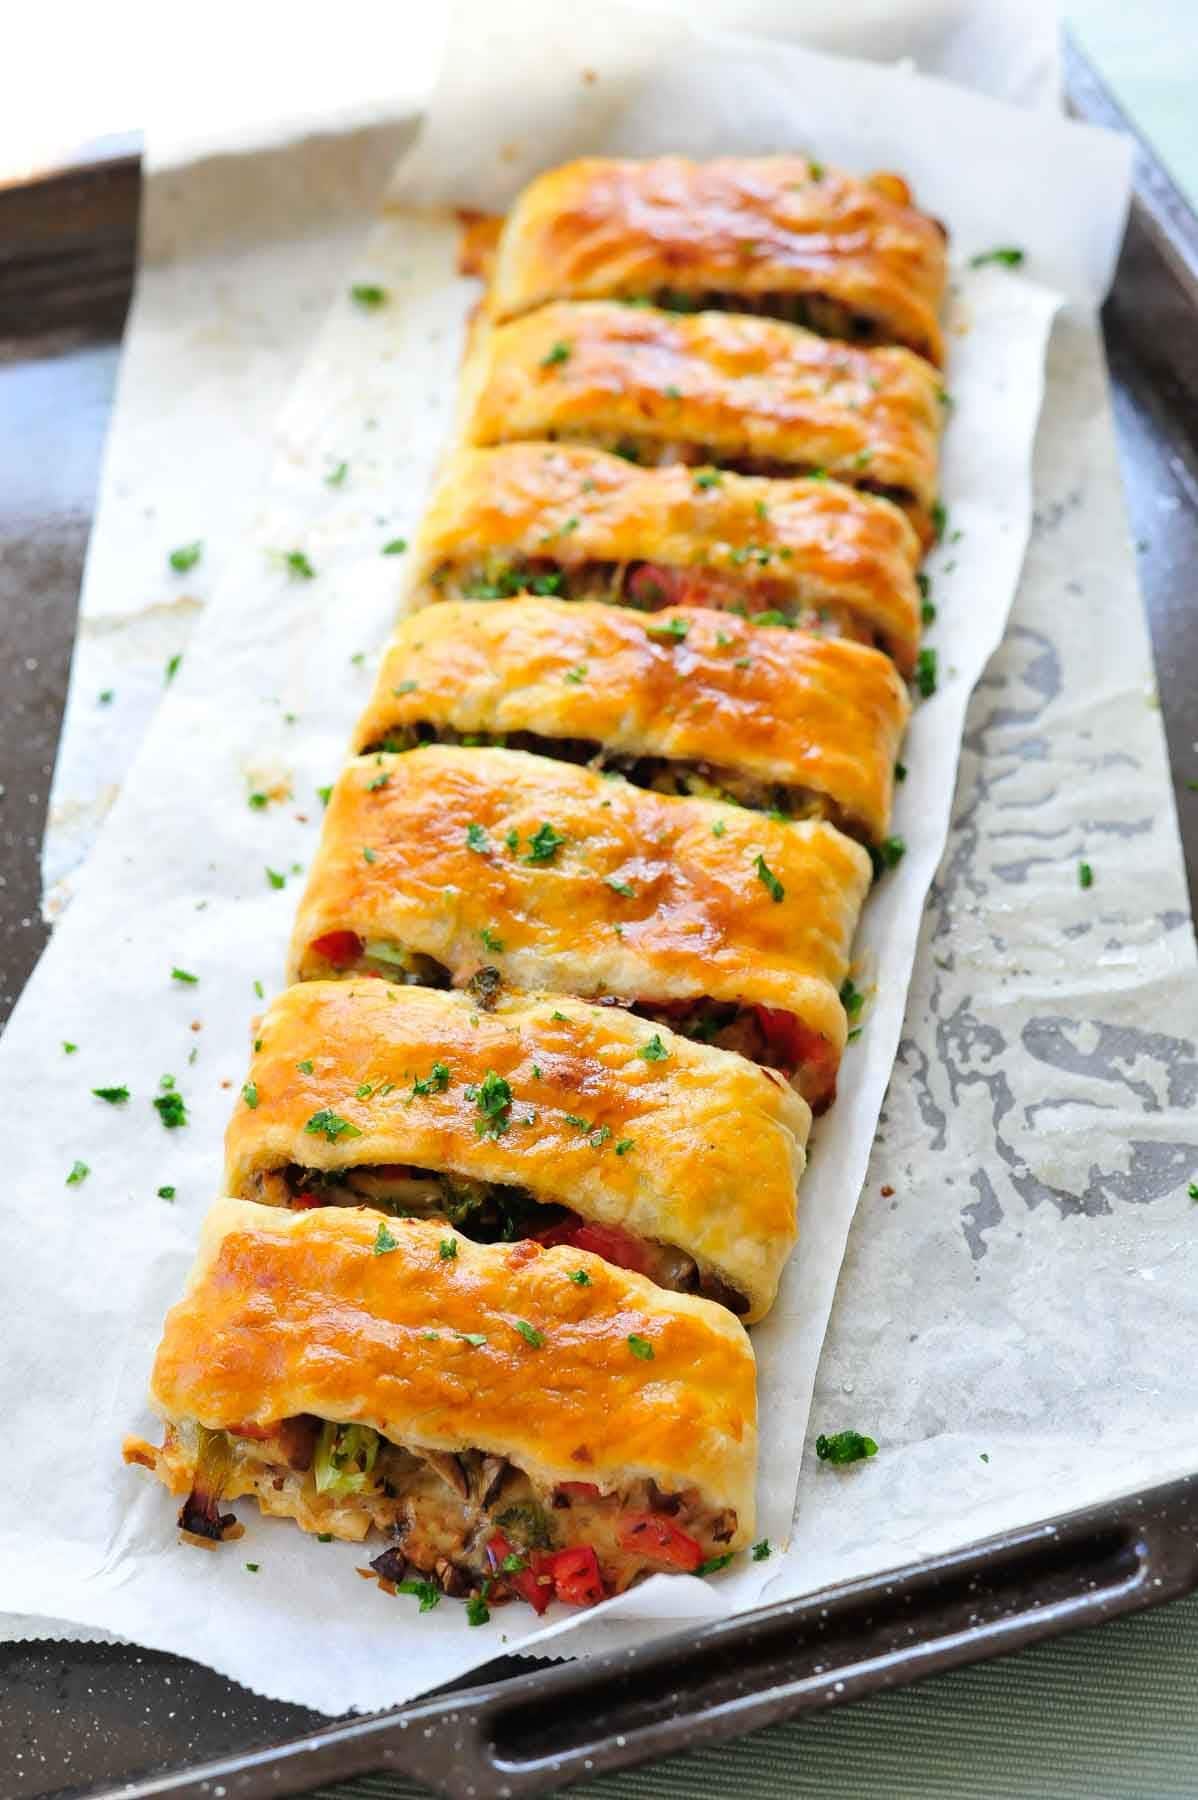 Puff pastry strudel with vegetables and cheese - Everyday Delicious